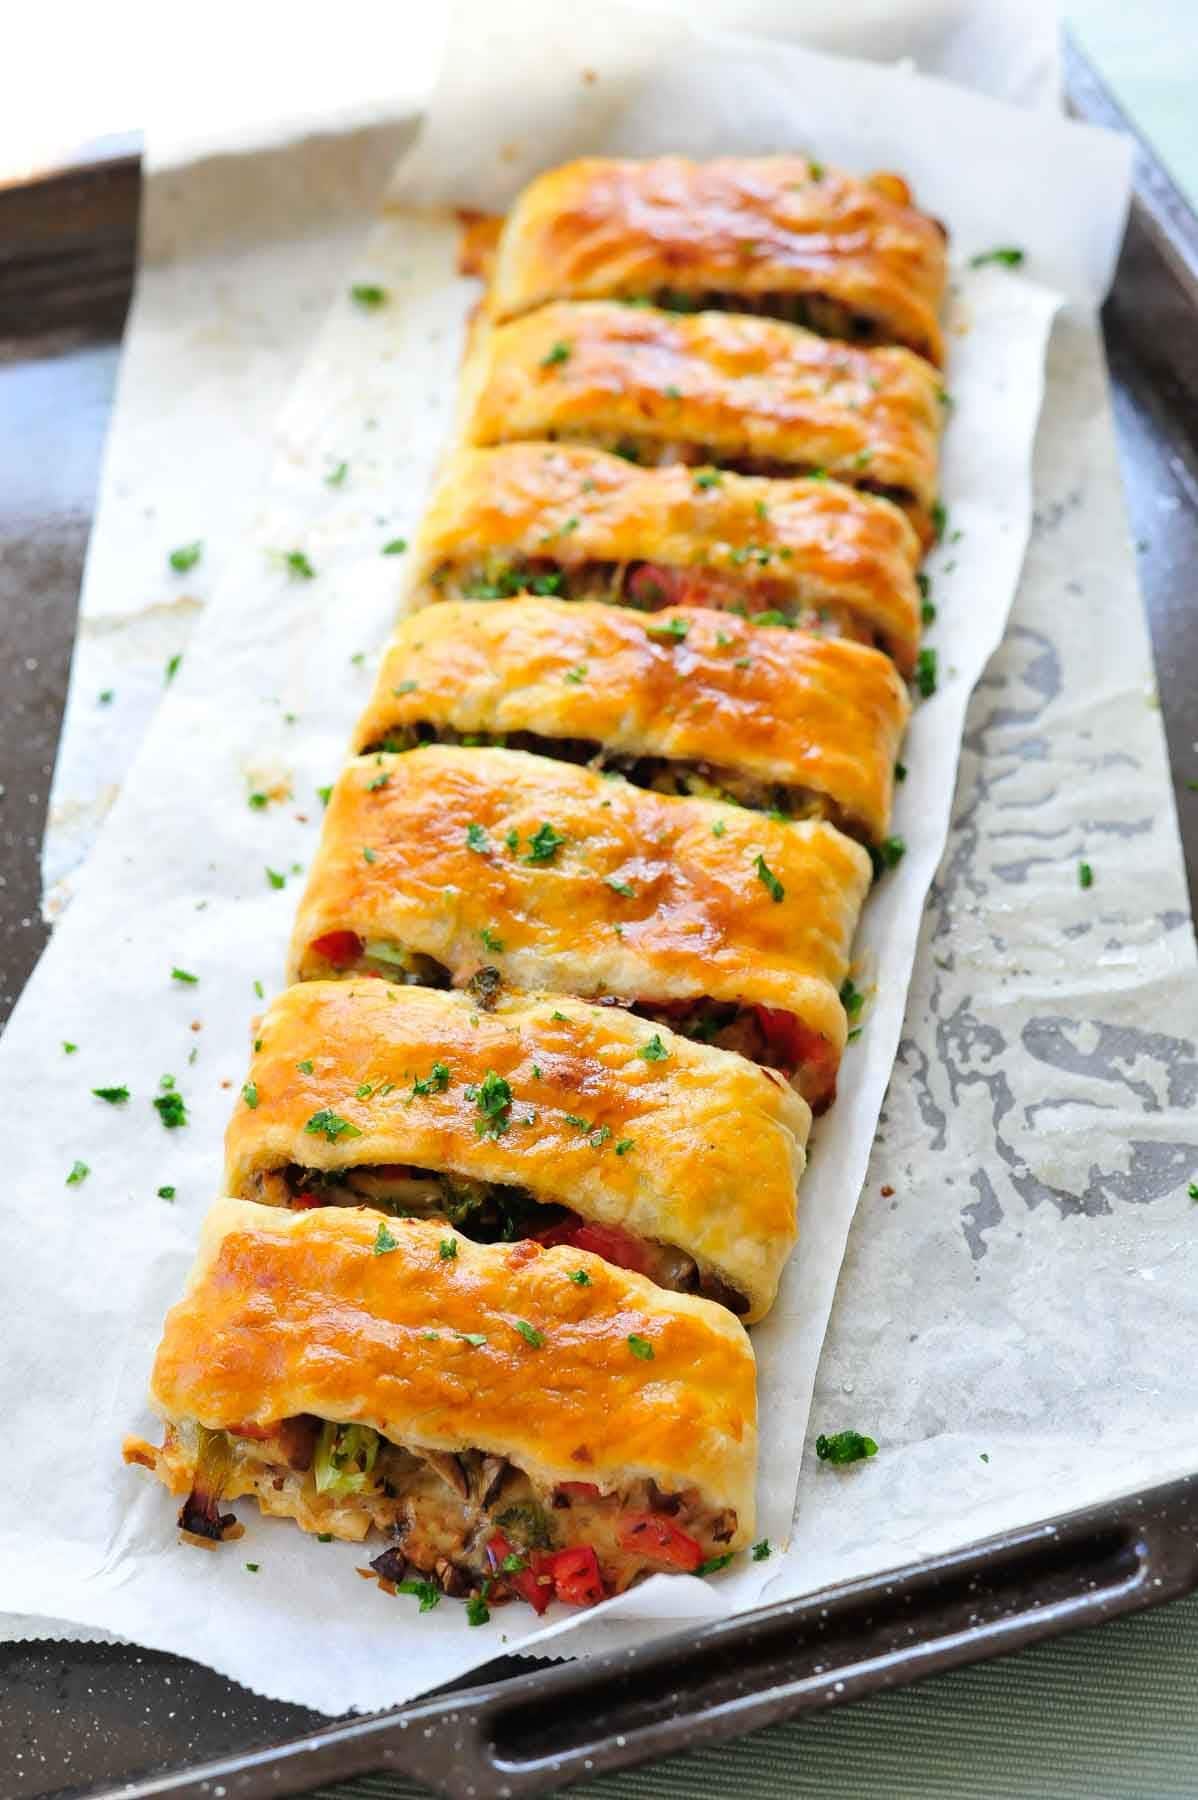 Puff pastry strudel with vegetables and cheese - Everyday Delicious